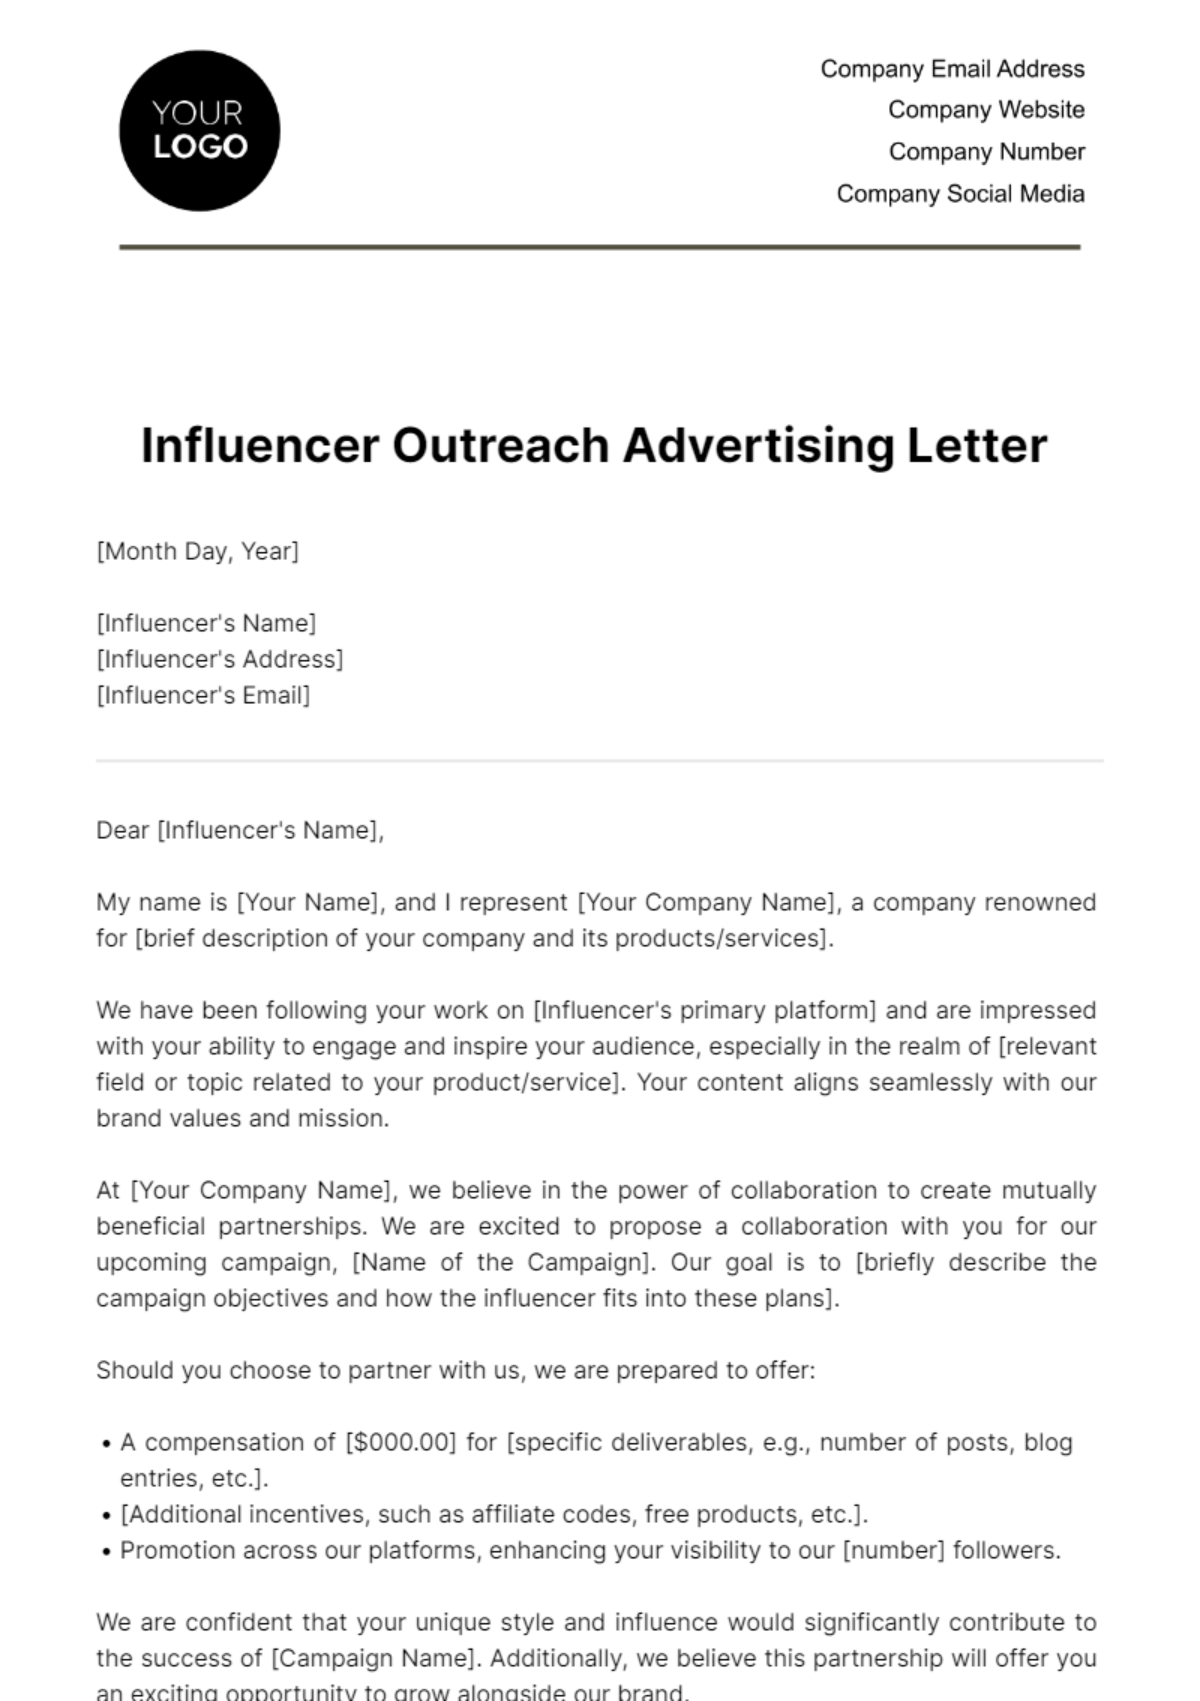 Free Influencer Outreach Advertising Letter Template